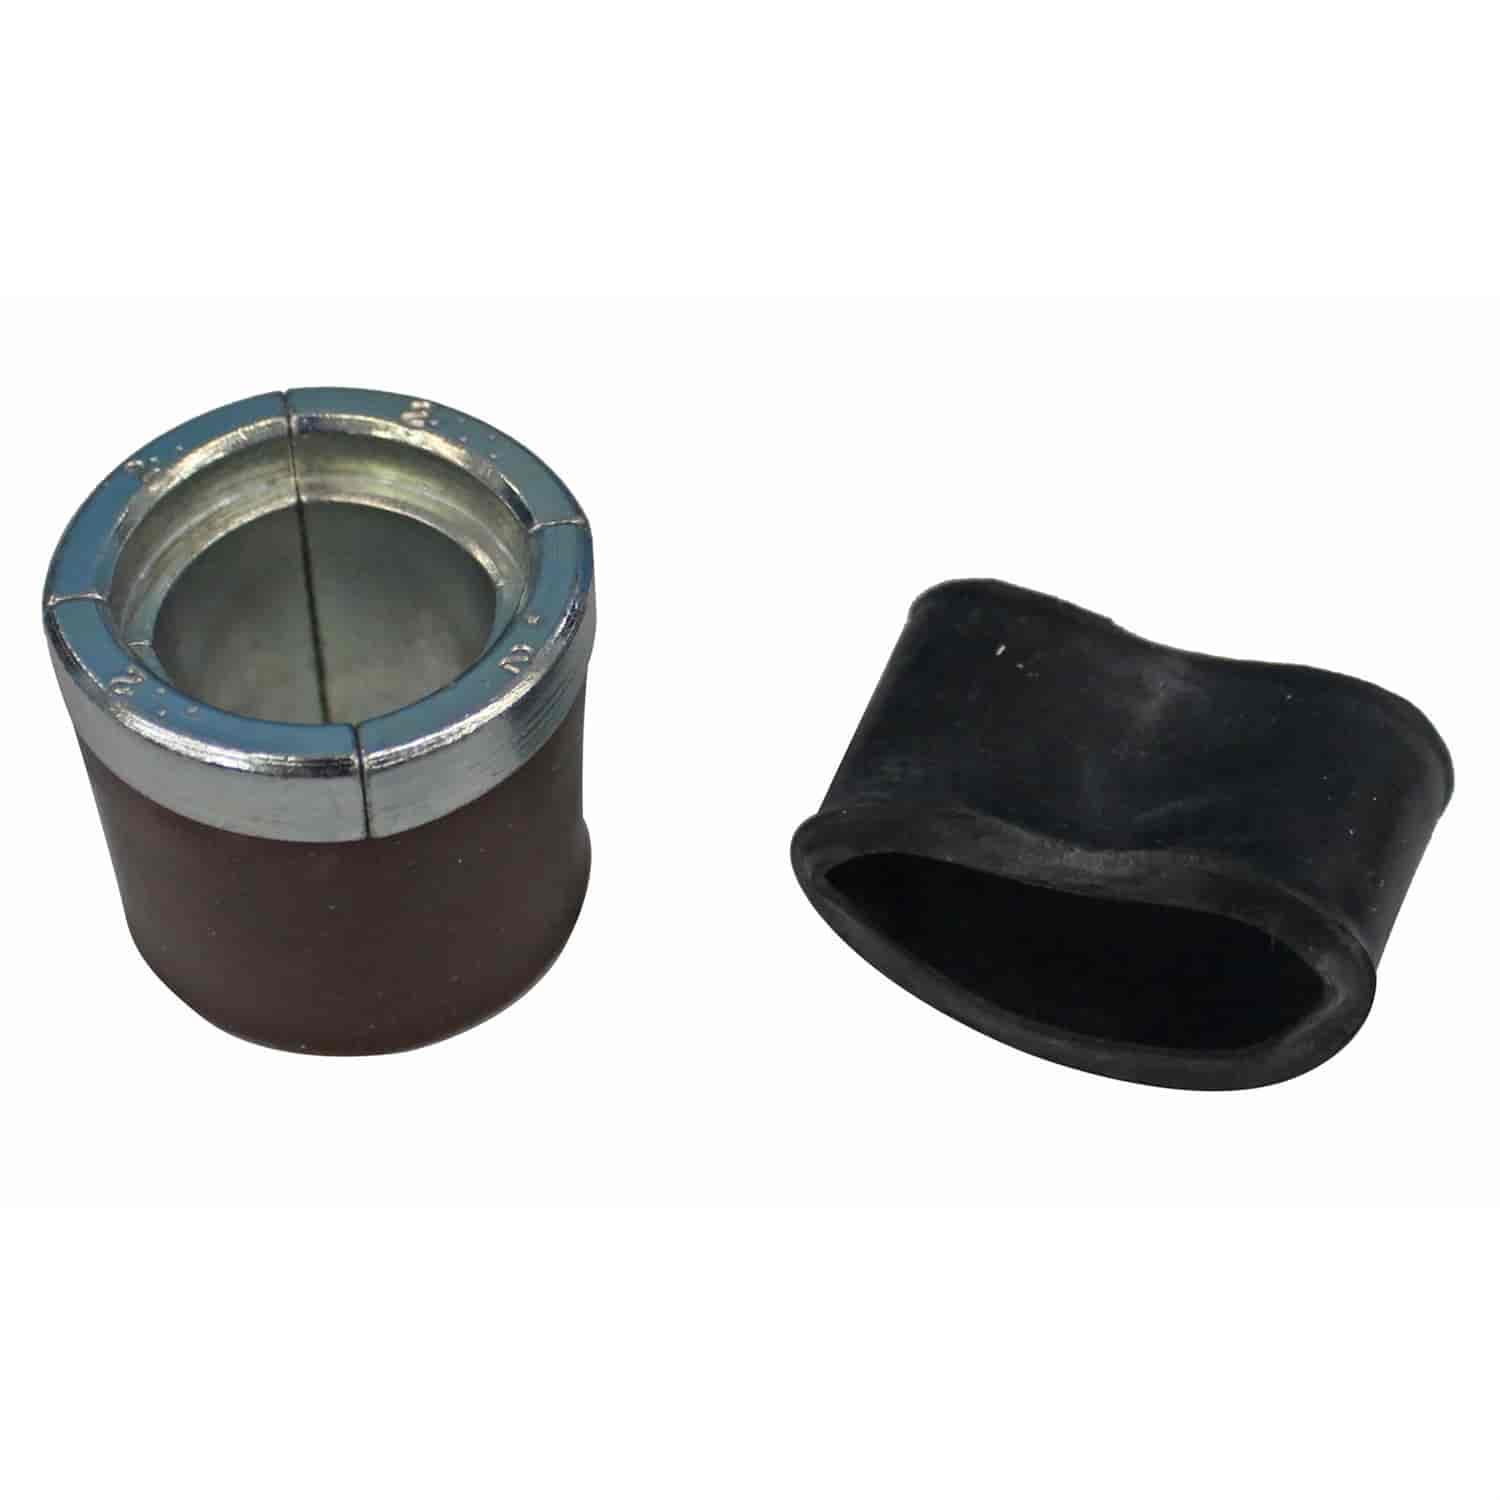 Expander Collet Bearing ID: 1.925" - 2.150"